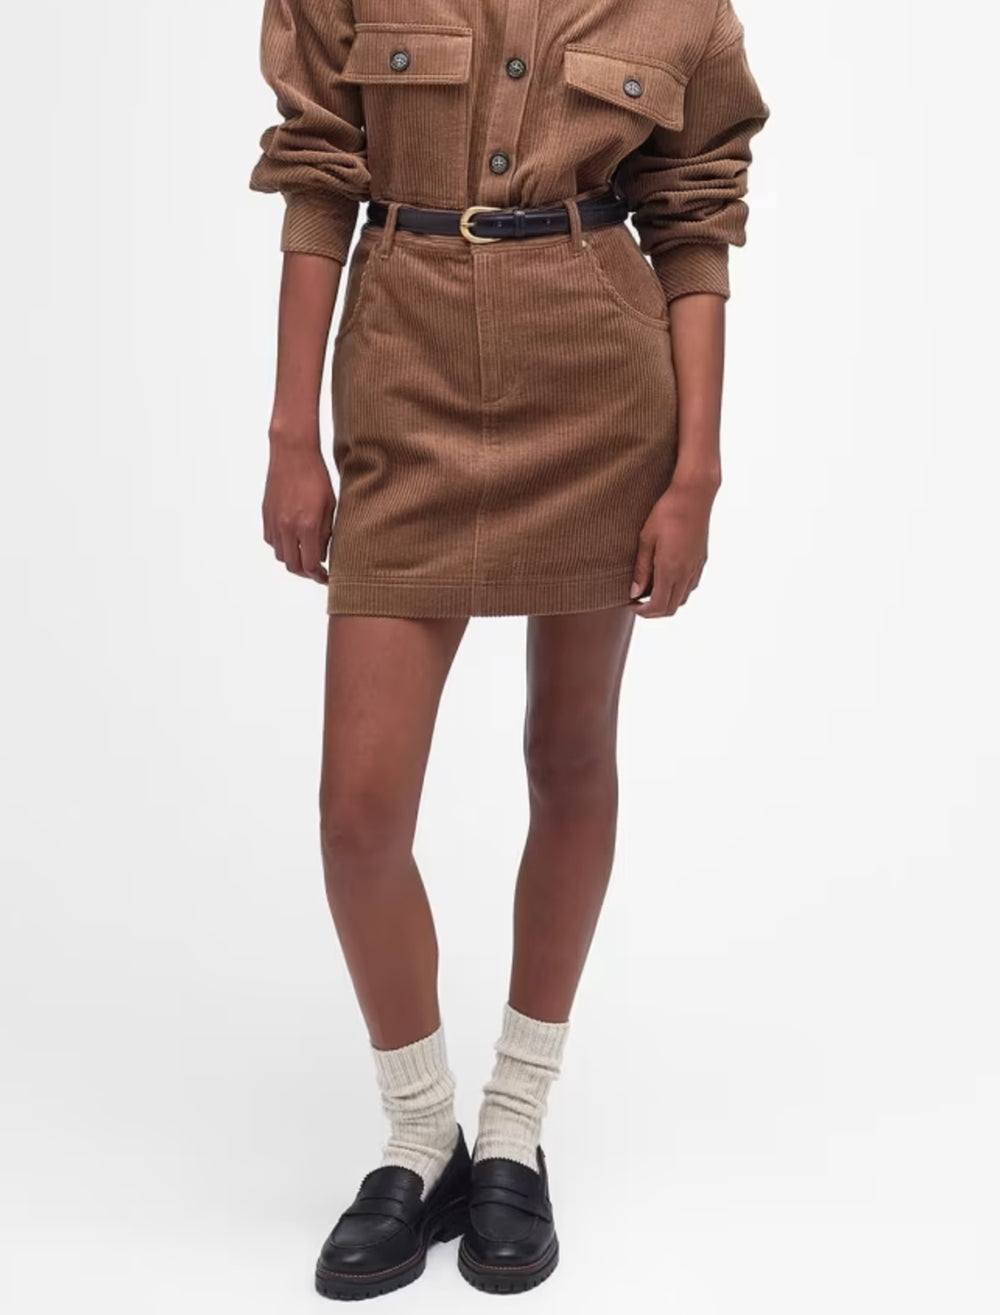 Model wearing Barbour's oakfield skirt in taupe corduroy.